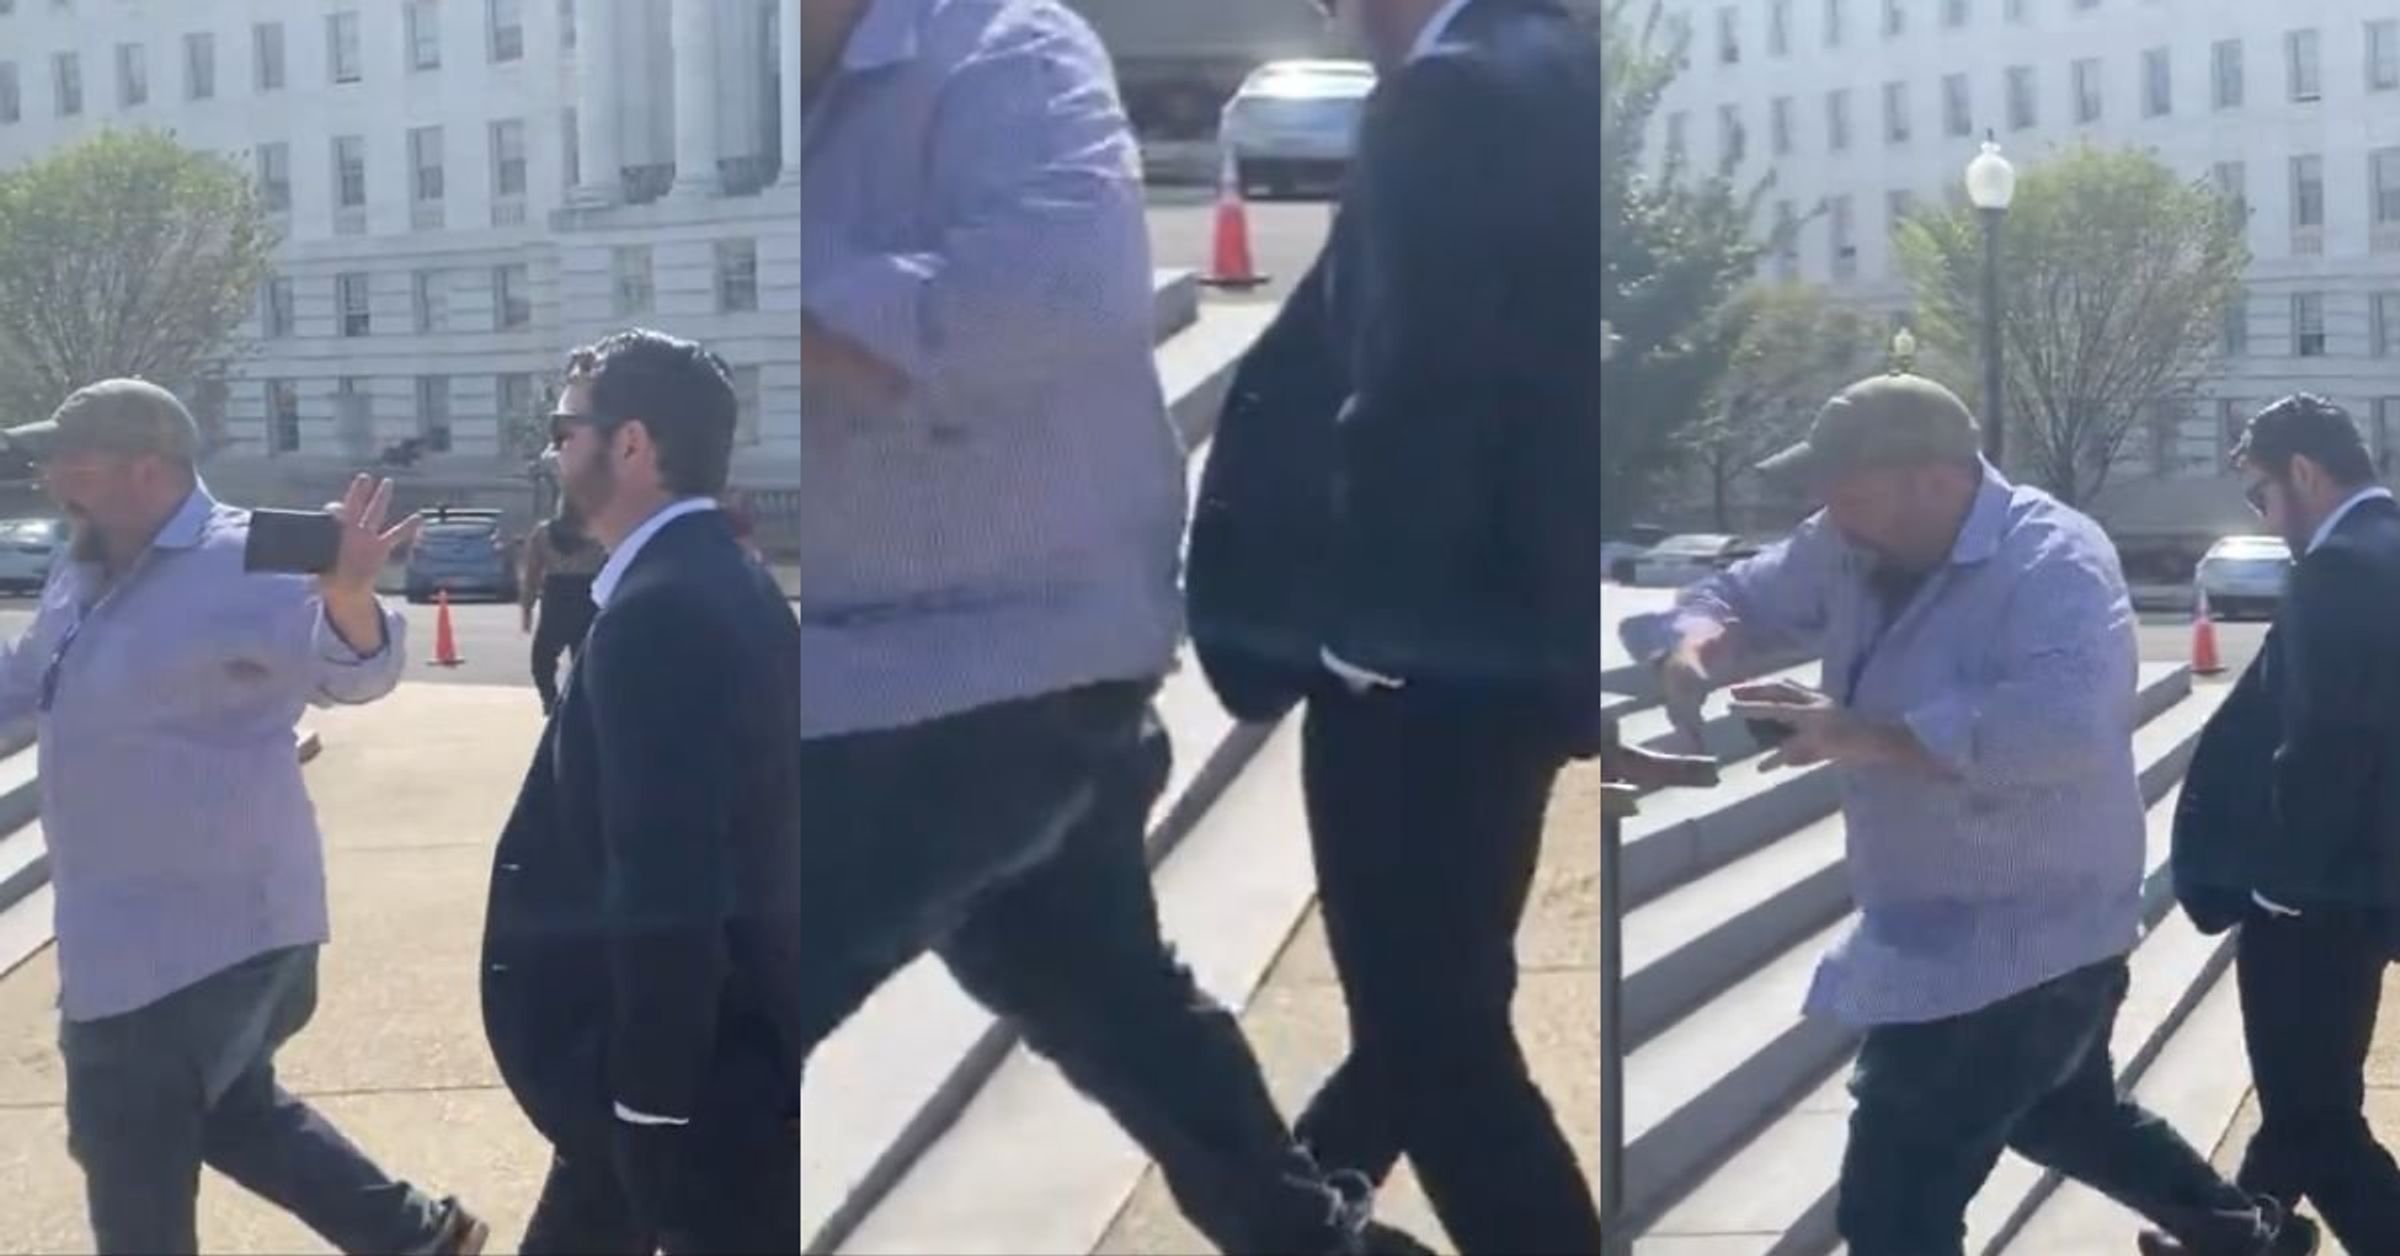 GOP Rep. Dan Crenshaw, Blind in One Eye, Caught on Camera ‘Tripping’ a Far Right Journalist. It May Not Have Been Intentional. (secondnexus.com)